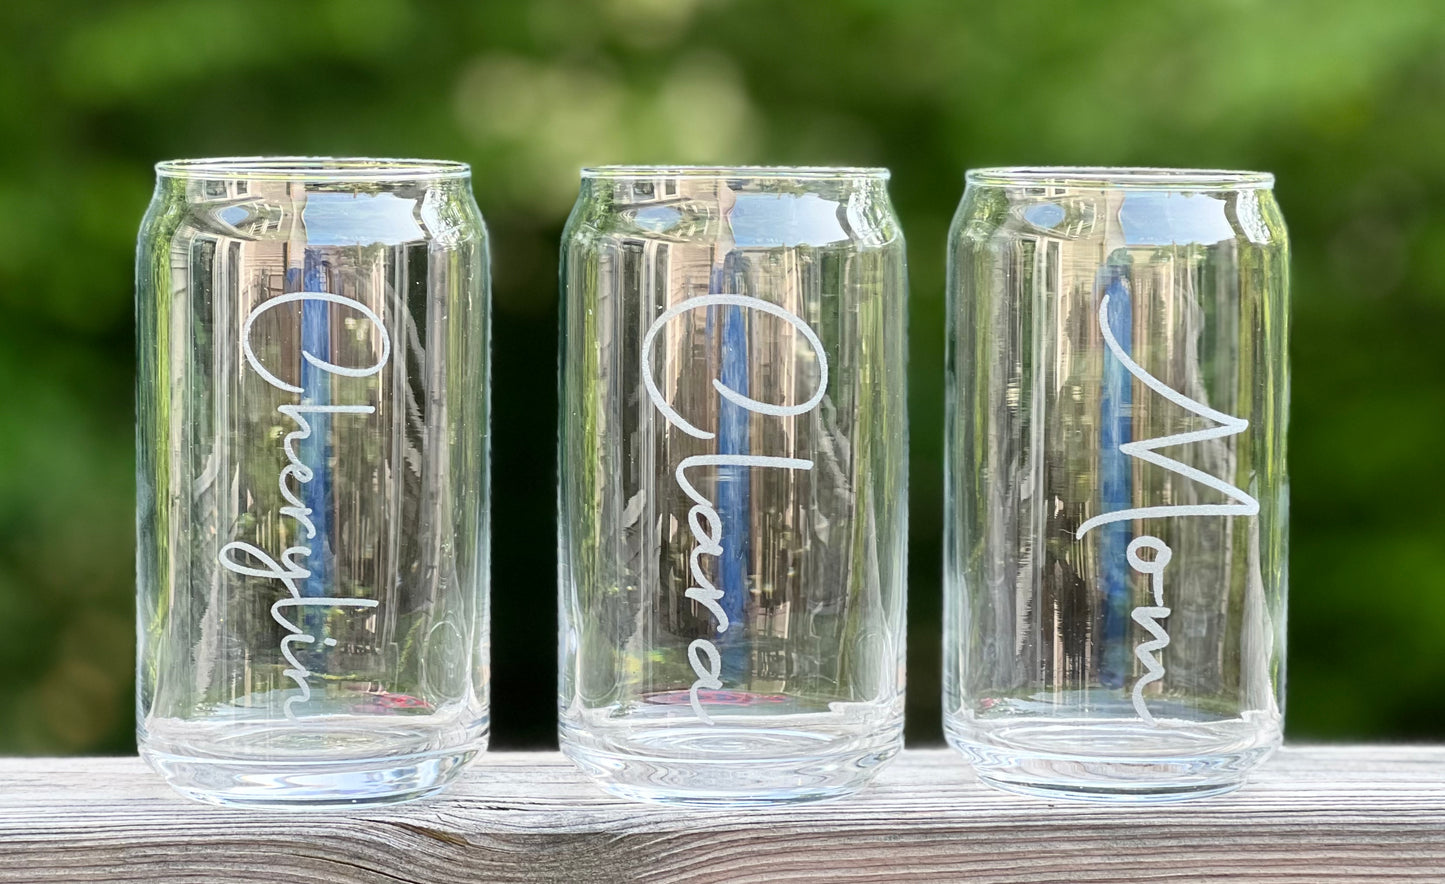 Engraved Personalized/Custom Name Beer Can Glass - Iced Coffee Glass - 16oz